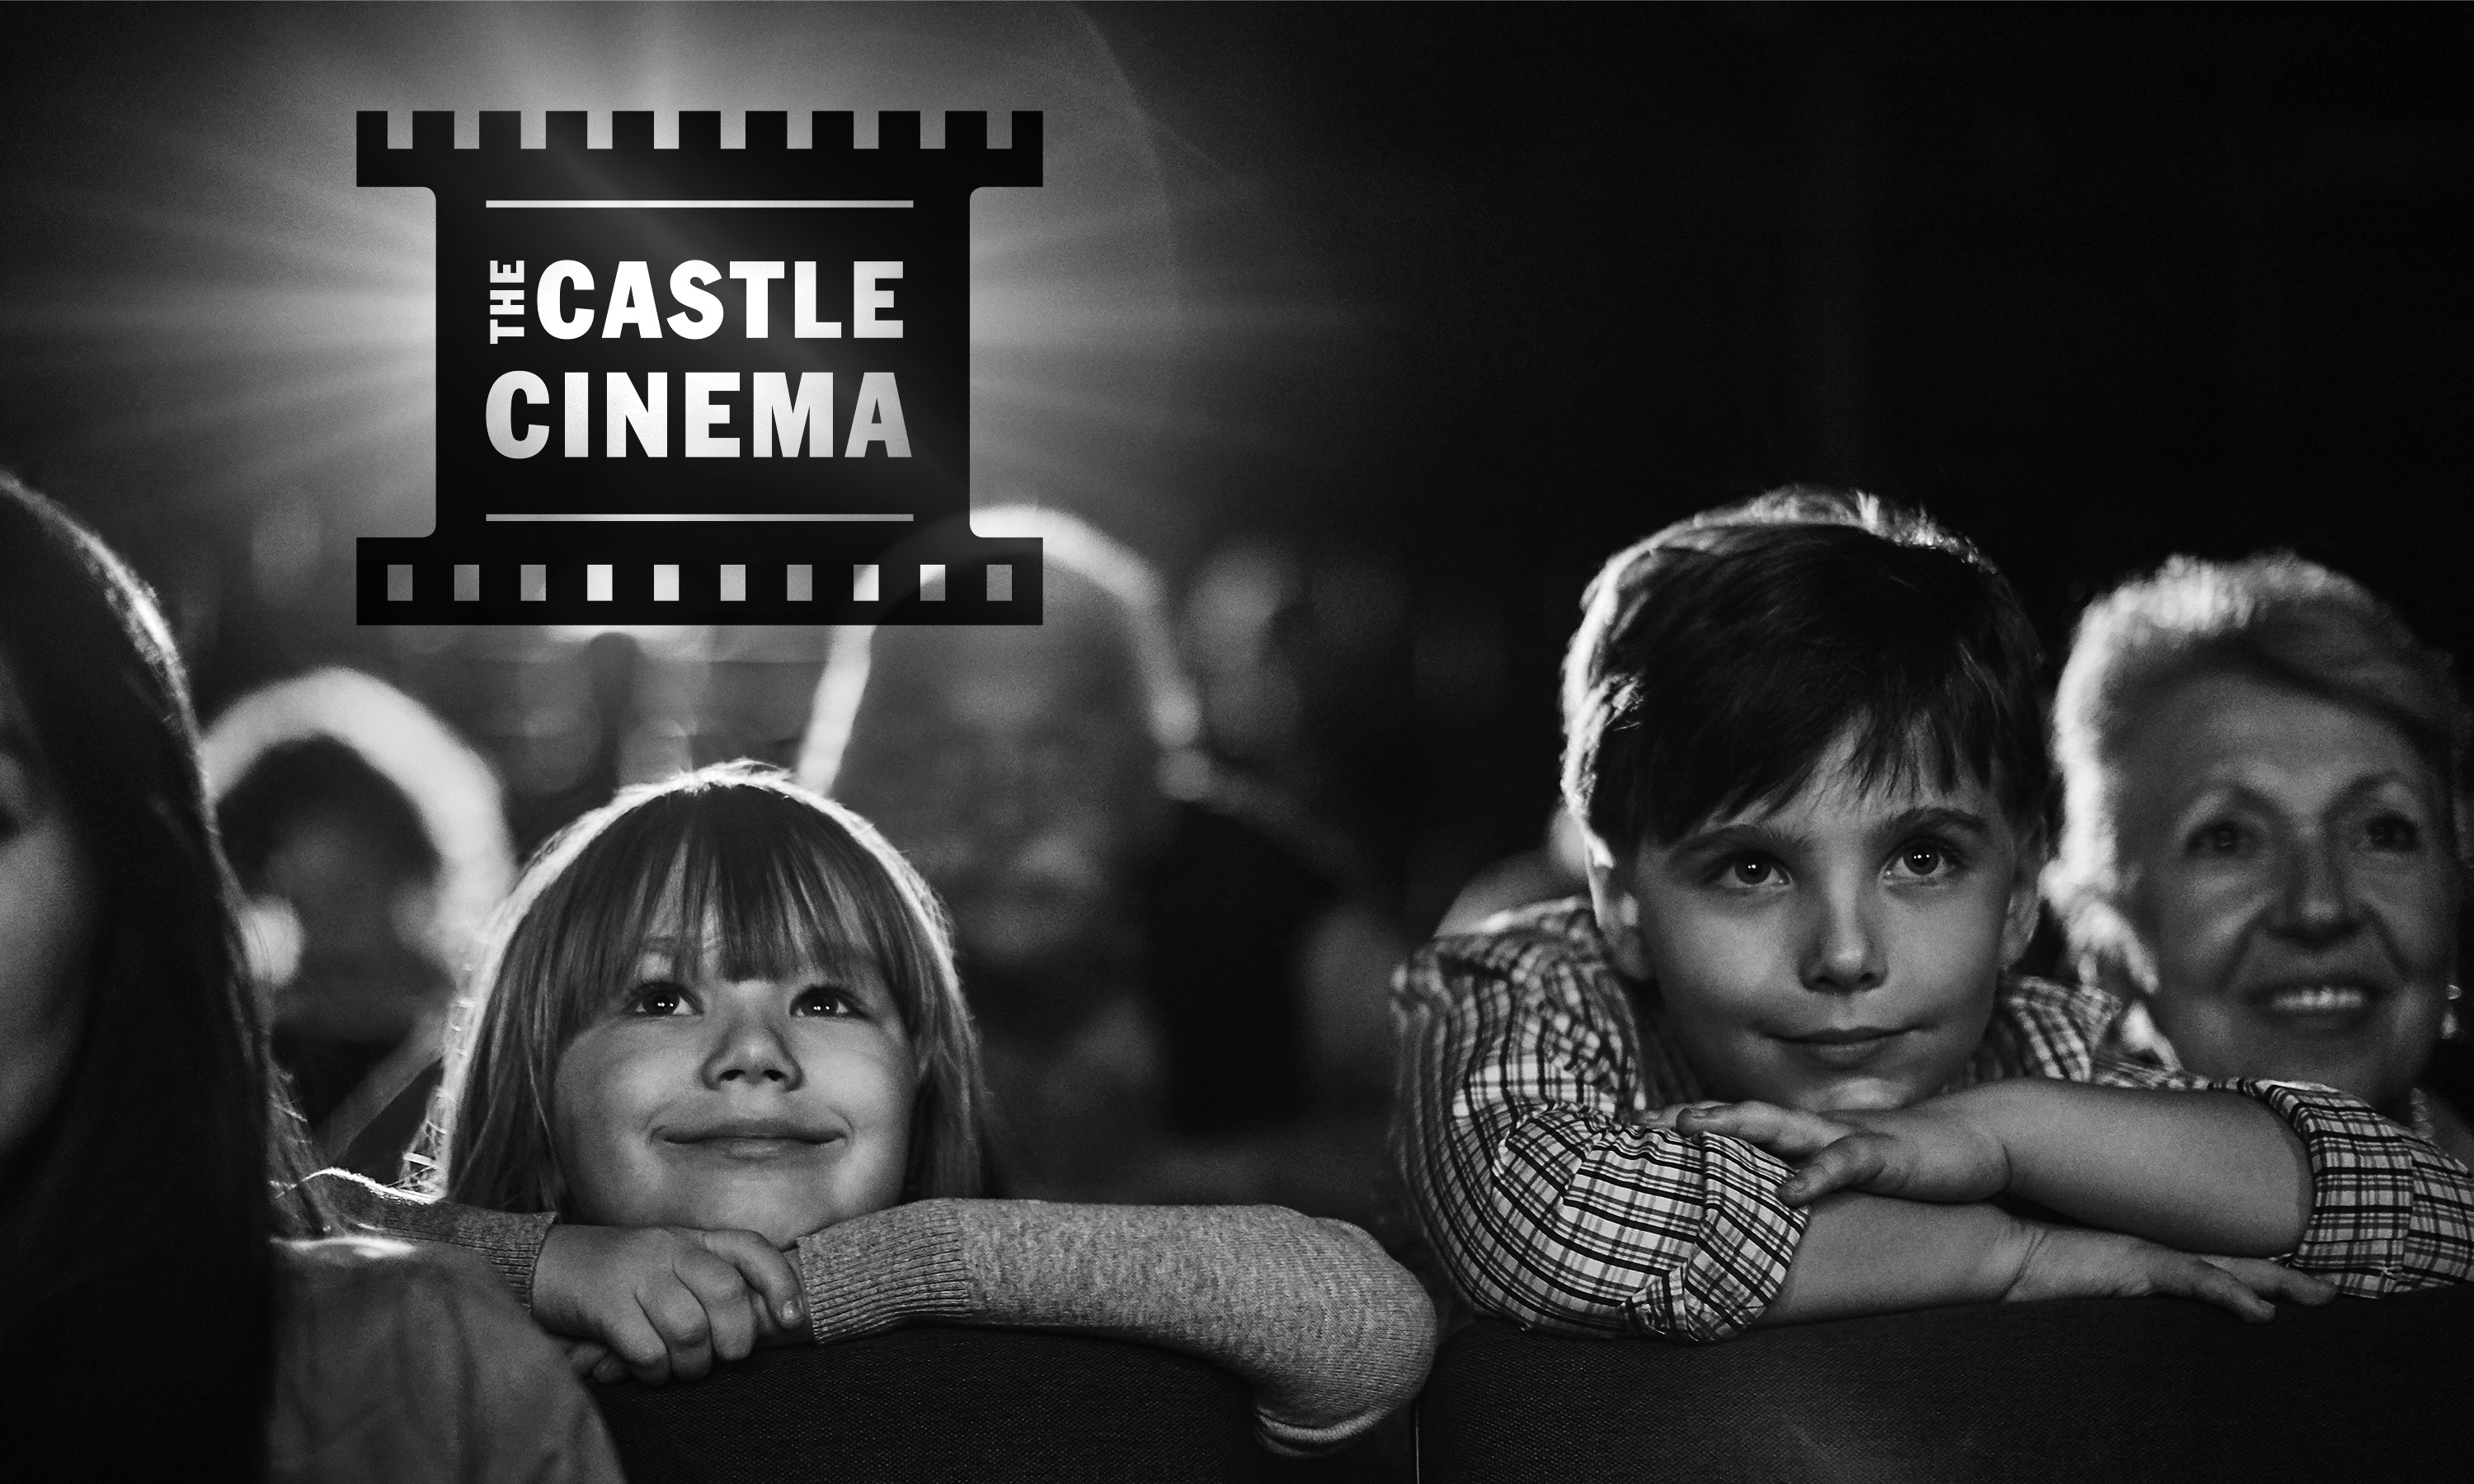 Branding by Neon Castle Cinema logo with audience designed by Dana Robertson